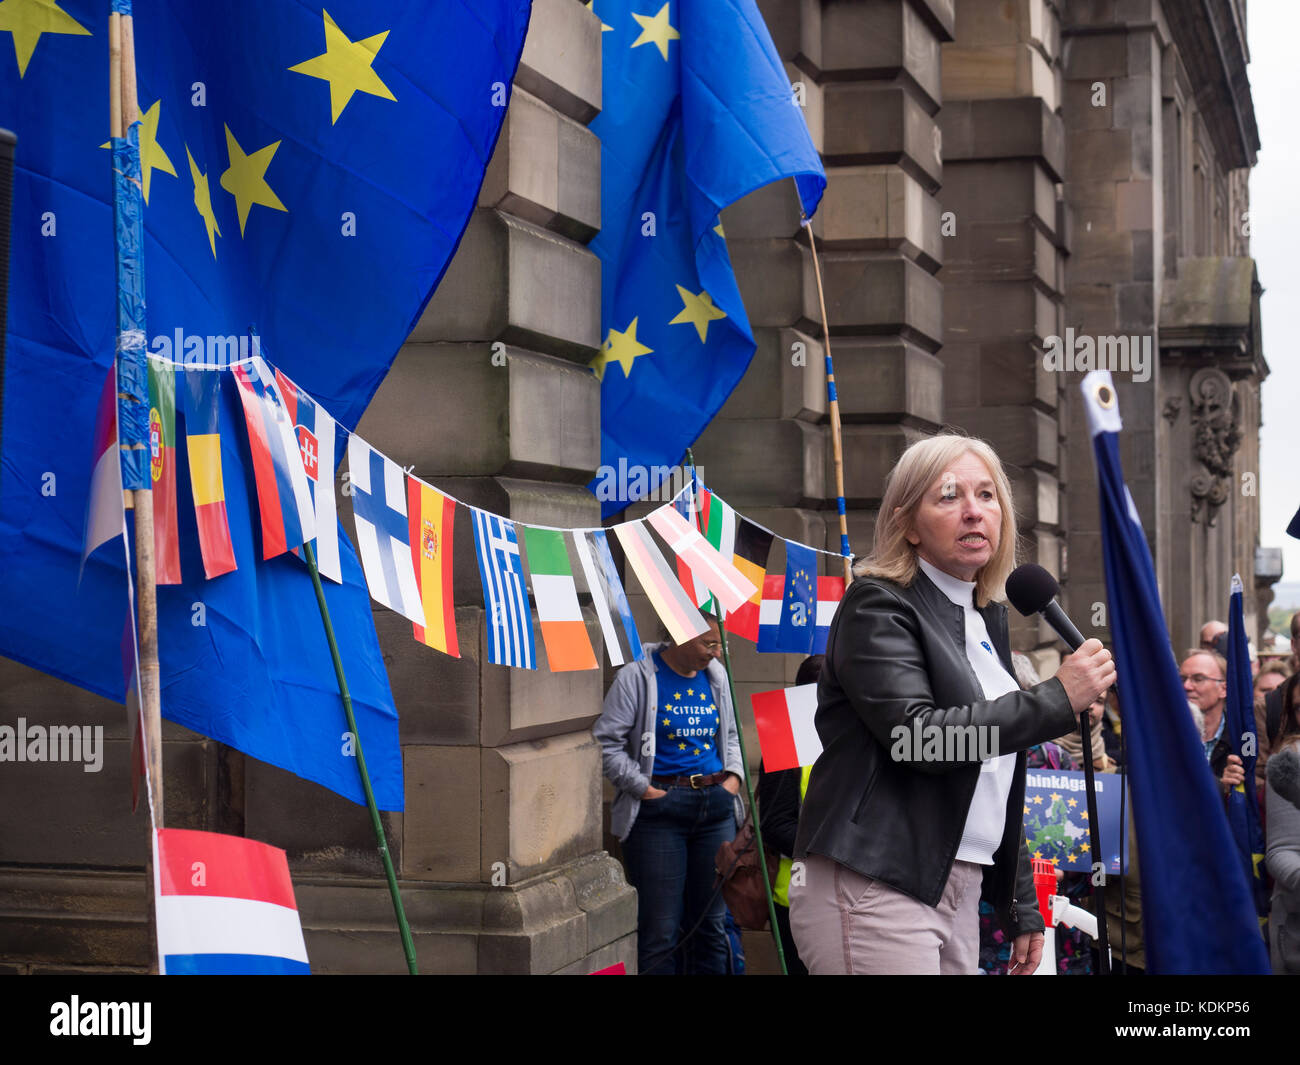 Edinburgh, UK - Oct 14, 2017: Vanessa Glynn, Chair of the European Movement in Scotland, is pictured as she talks to Pro EU supporters at an anti Brexit rally in Edinburgh. The rally was one of 12 held across the UK to allow people to show their support for the UK remaining part of the European Union. Credit: AC Images/Alamy Live News Stock Photo